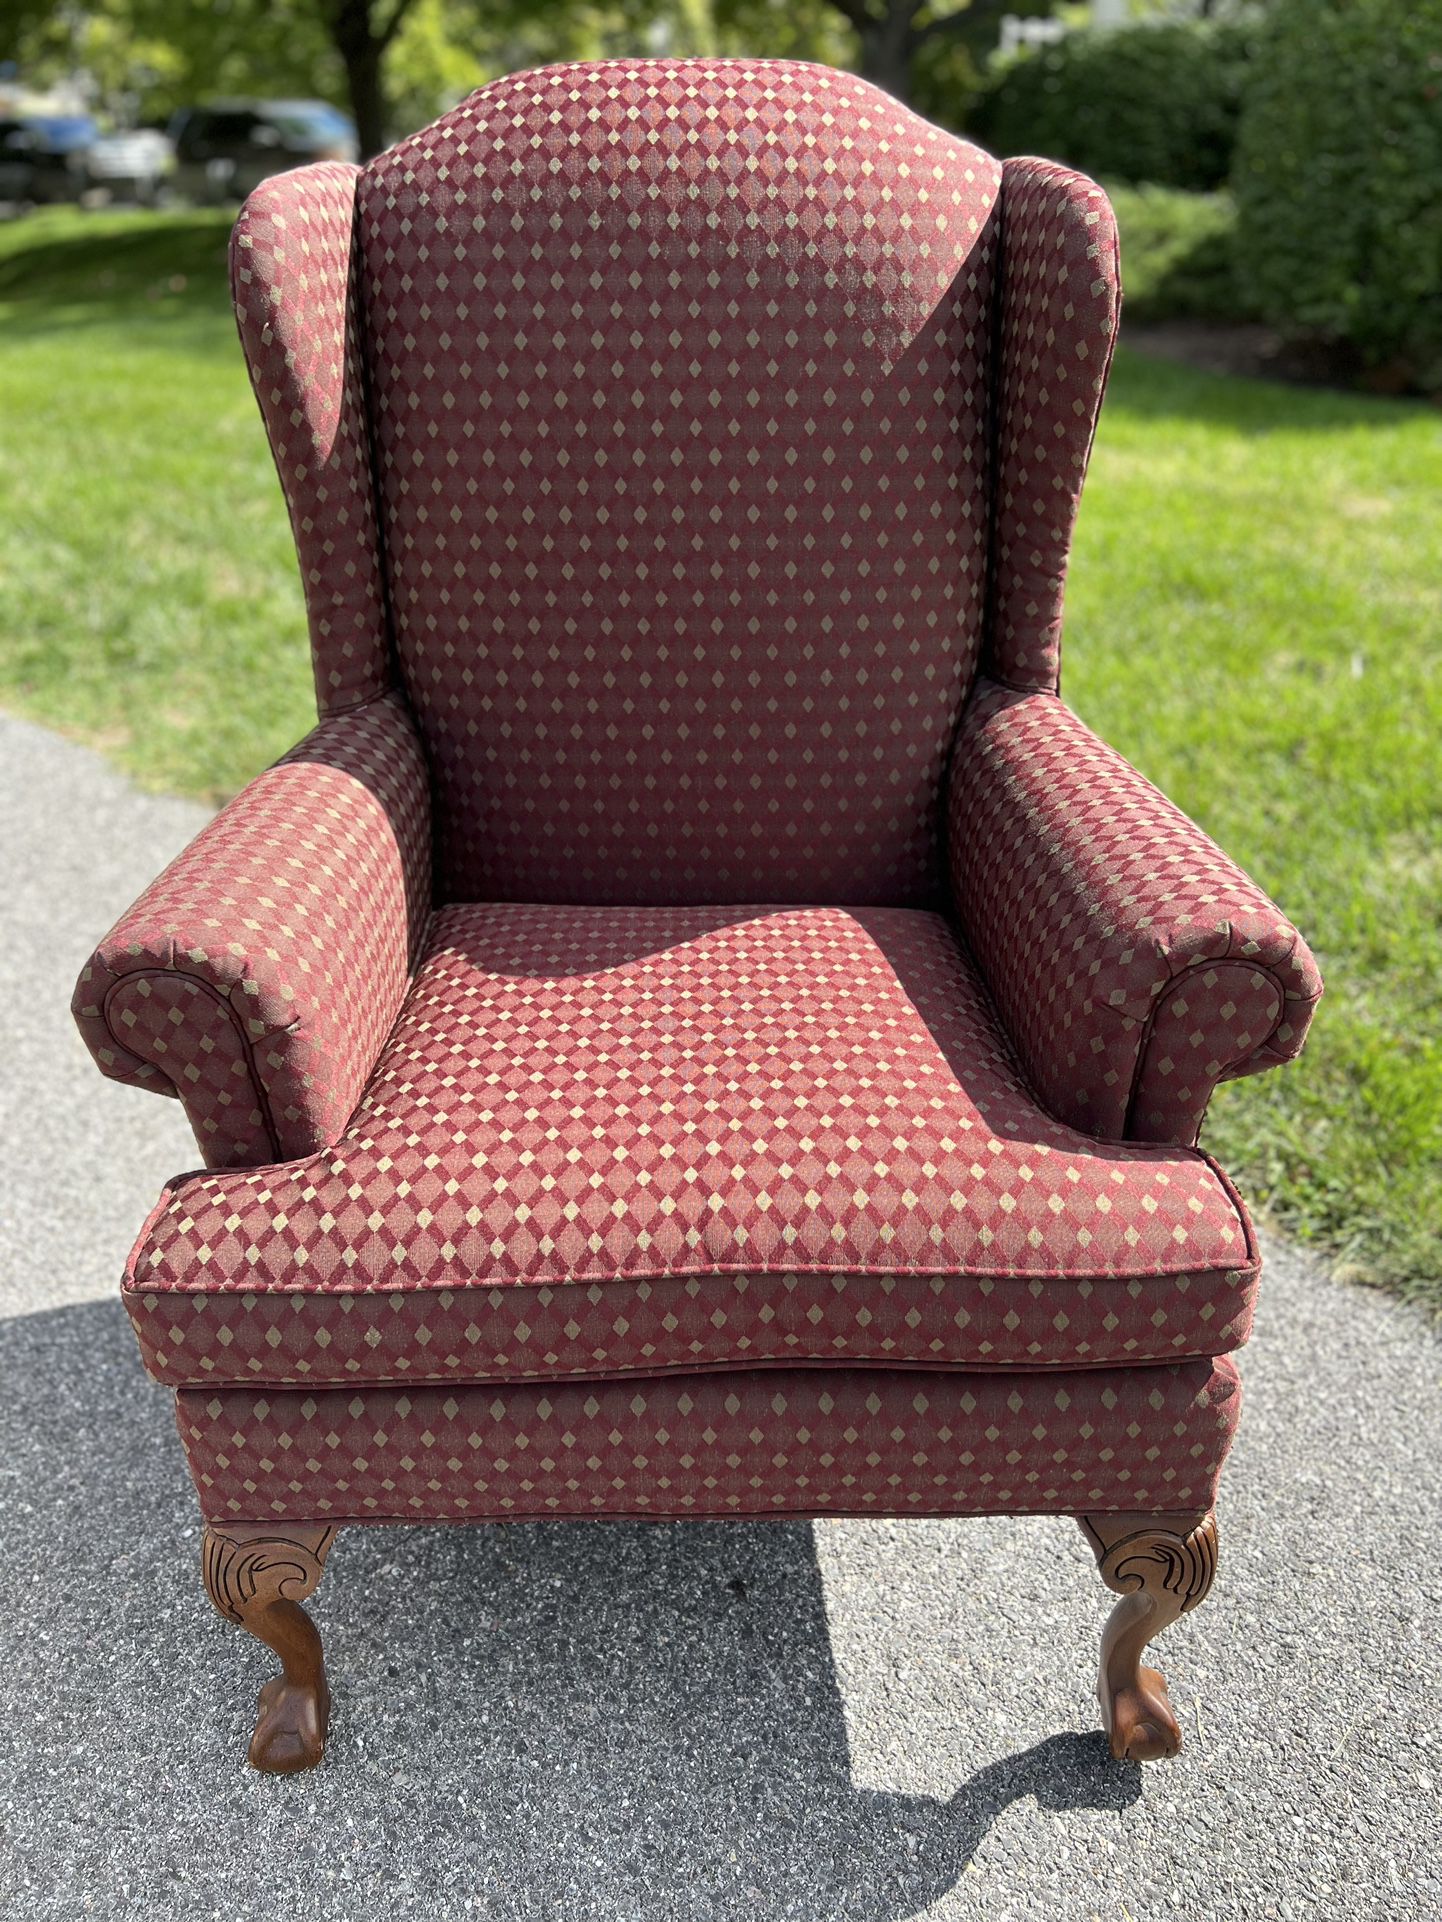 Free La-Z-Boy Wingback Chair. Hand crafted by Clayton Marcus